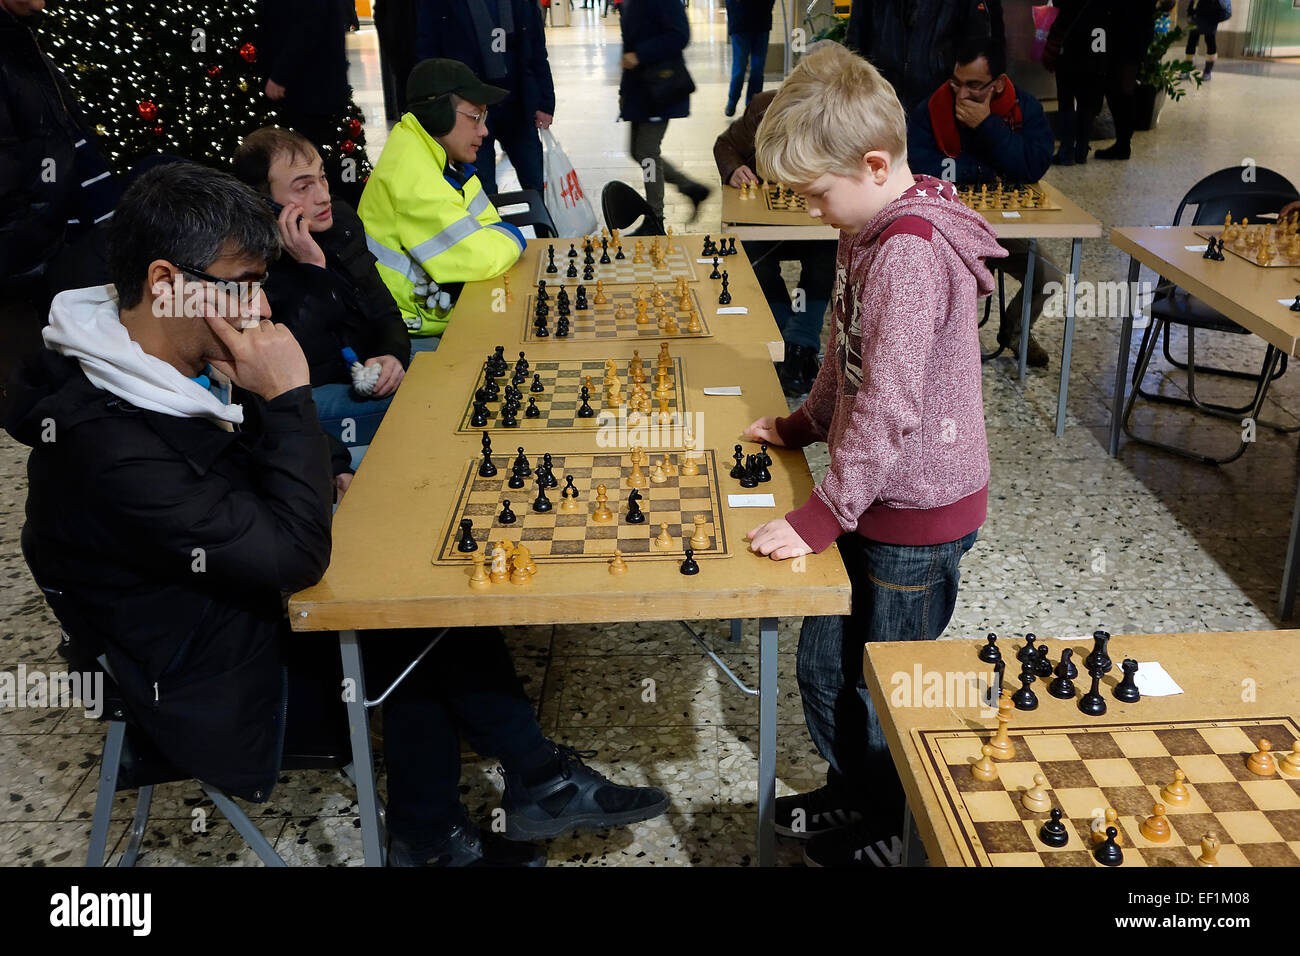 10 years old boy plays simultaneous chess game with 10 adult participants .  Nordstan, Göteborg,  Gothenburg, Sweden Stock Photo